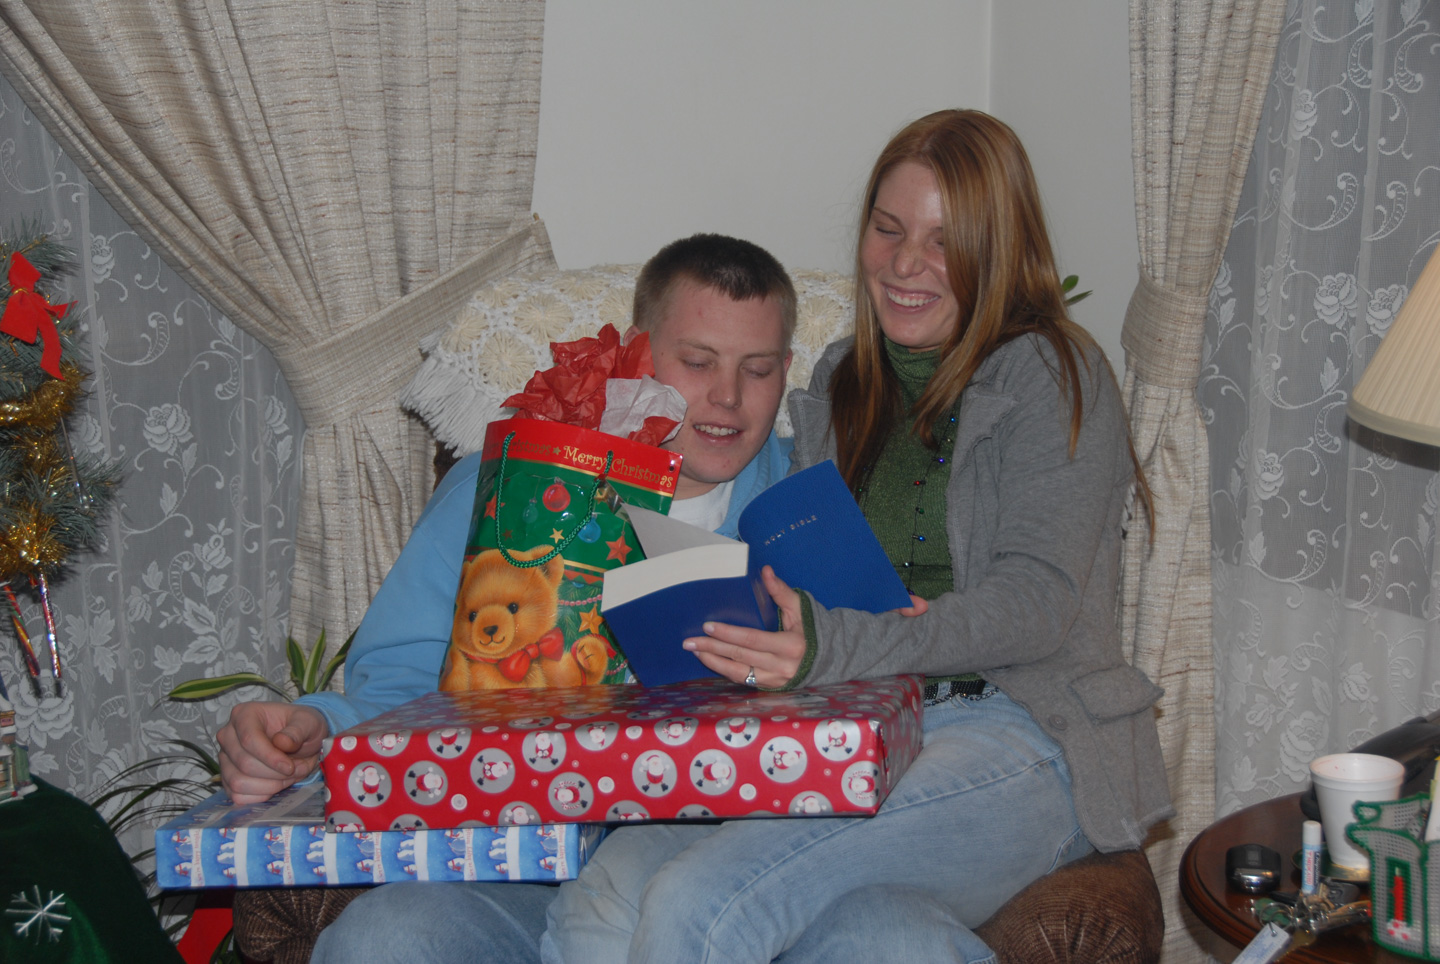 gifts piled on Pat and Fallyn